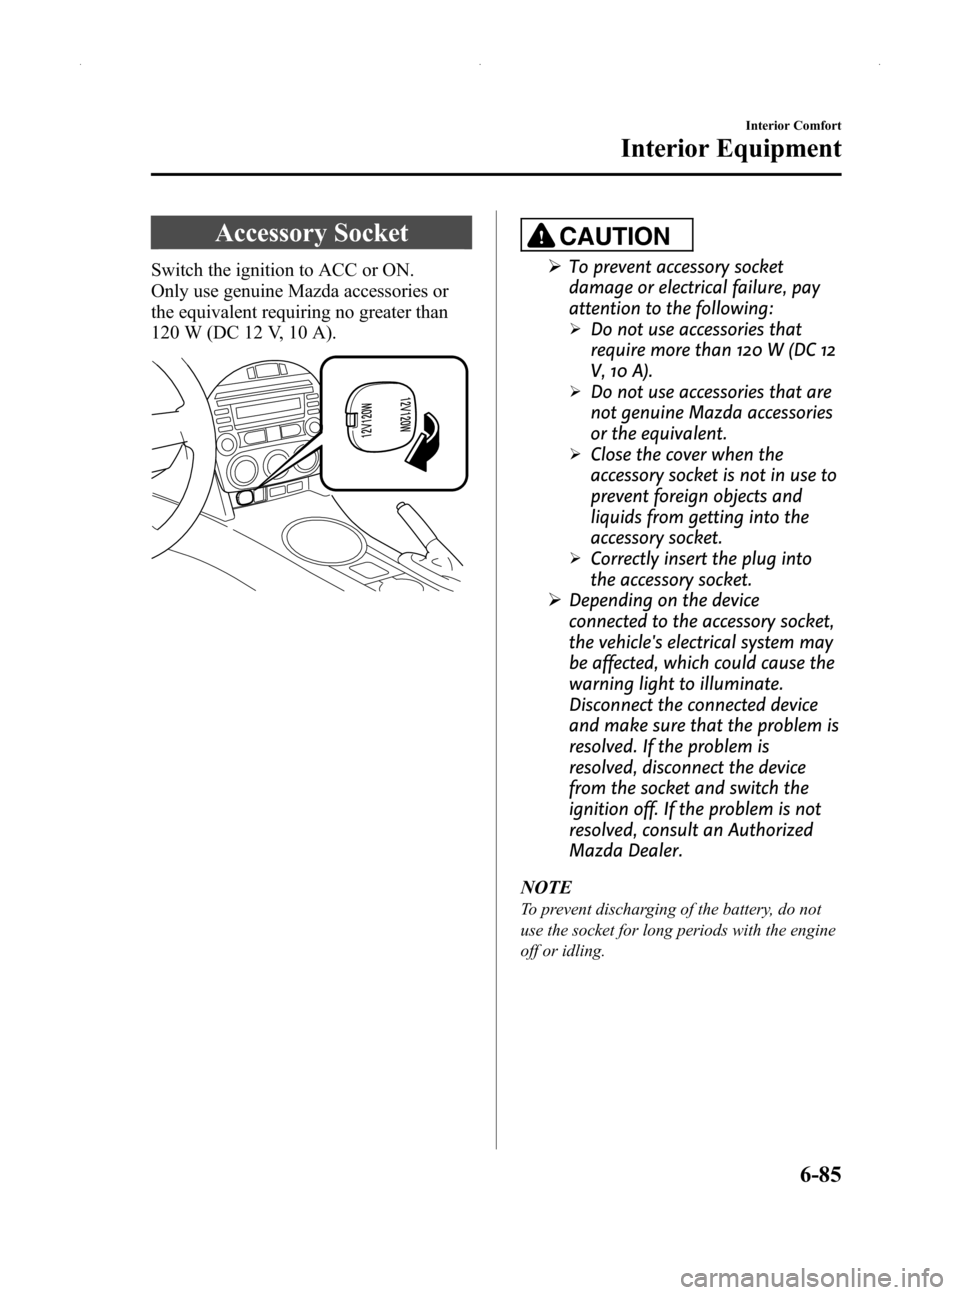 MAZDA MODEL MX-5 2014  Owners Manual (in English) Black plate (299,1)
Accessory Socket
Switch the ignition to ACC or ON.
Only use genuine Mazda accessories or
the equivalent requiring no greater than
120 W (DC 12 V, 10 A).
CAUTION
ØTo prevent access